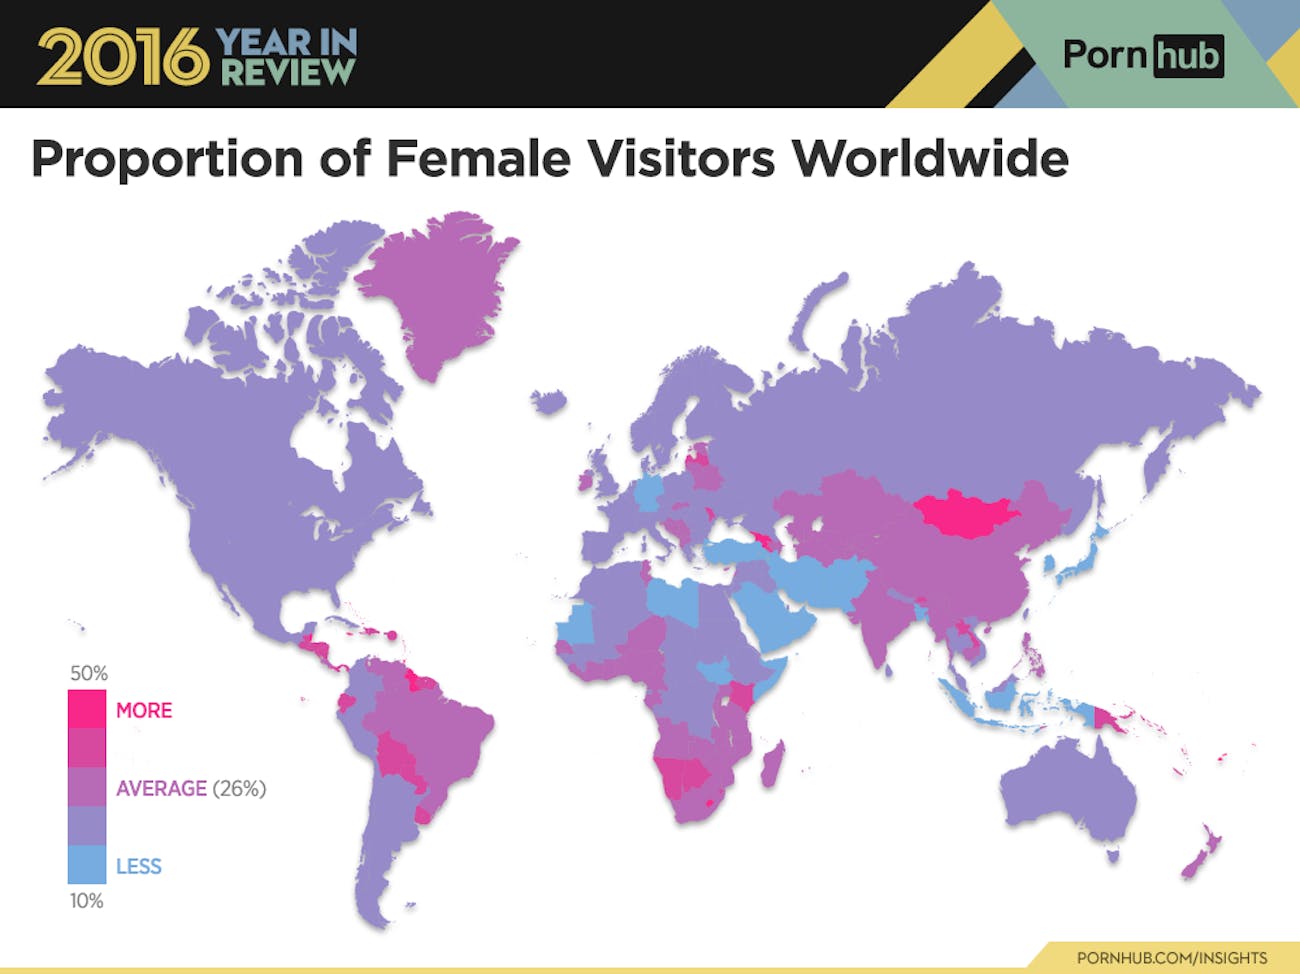 Most Viewed Interracial Sex - Pornhub Released a Detailed Map of the World's Porn ...